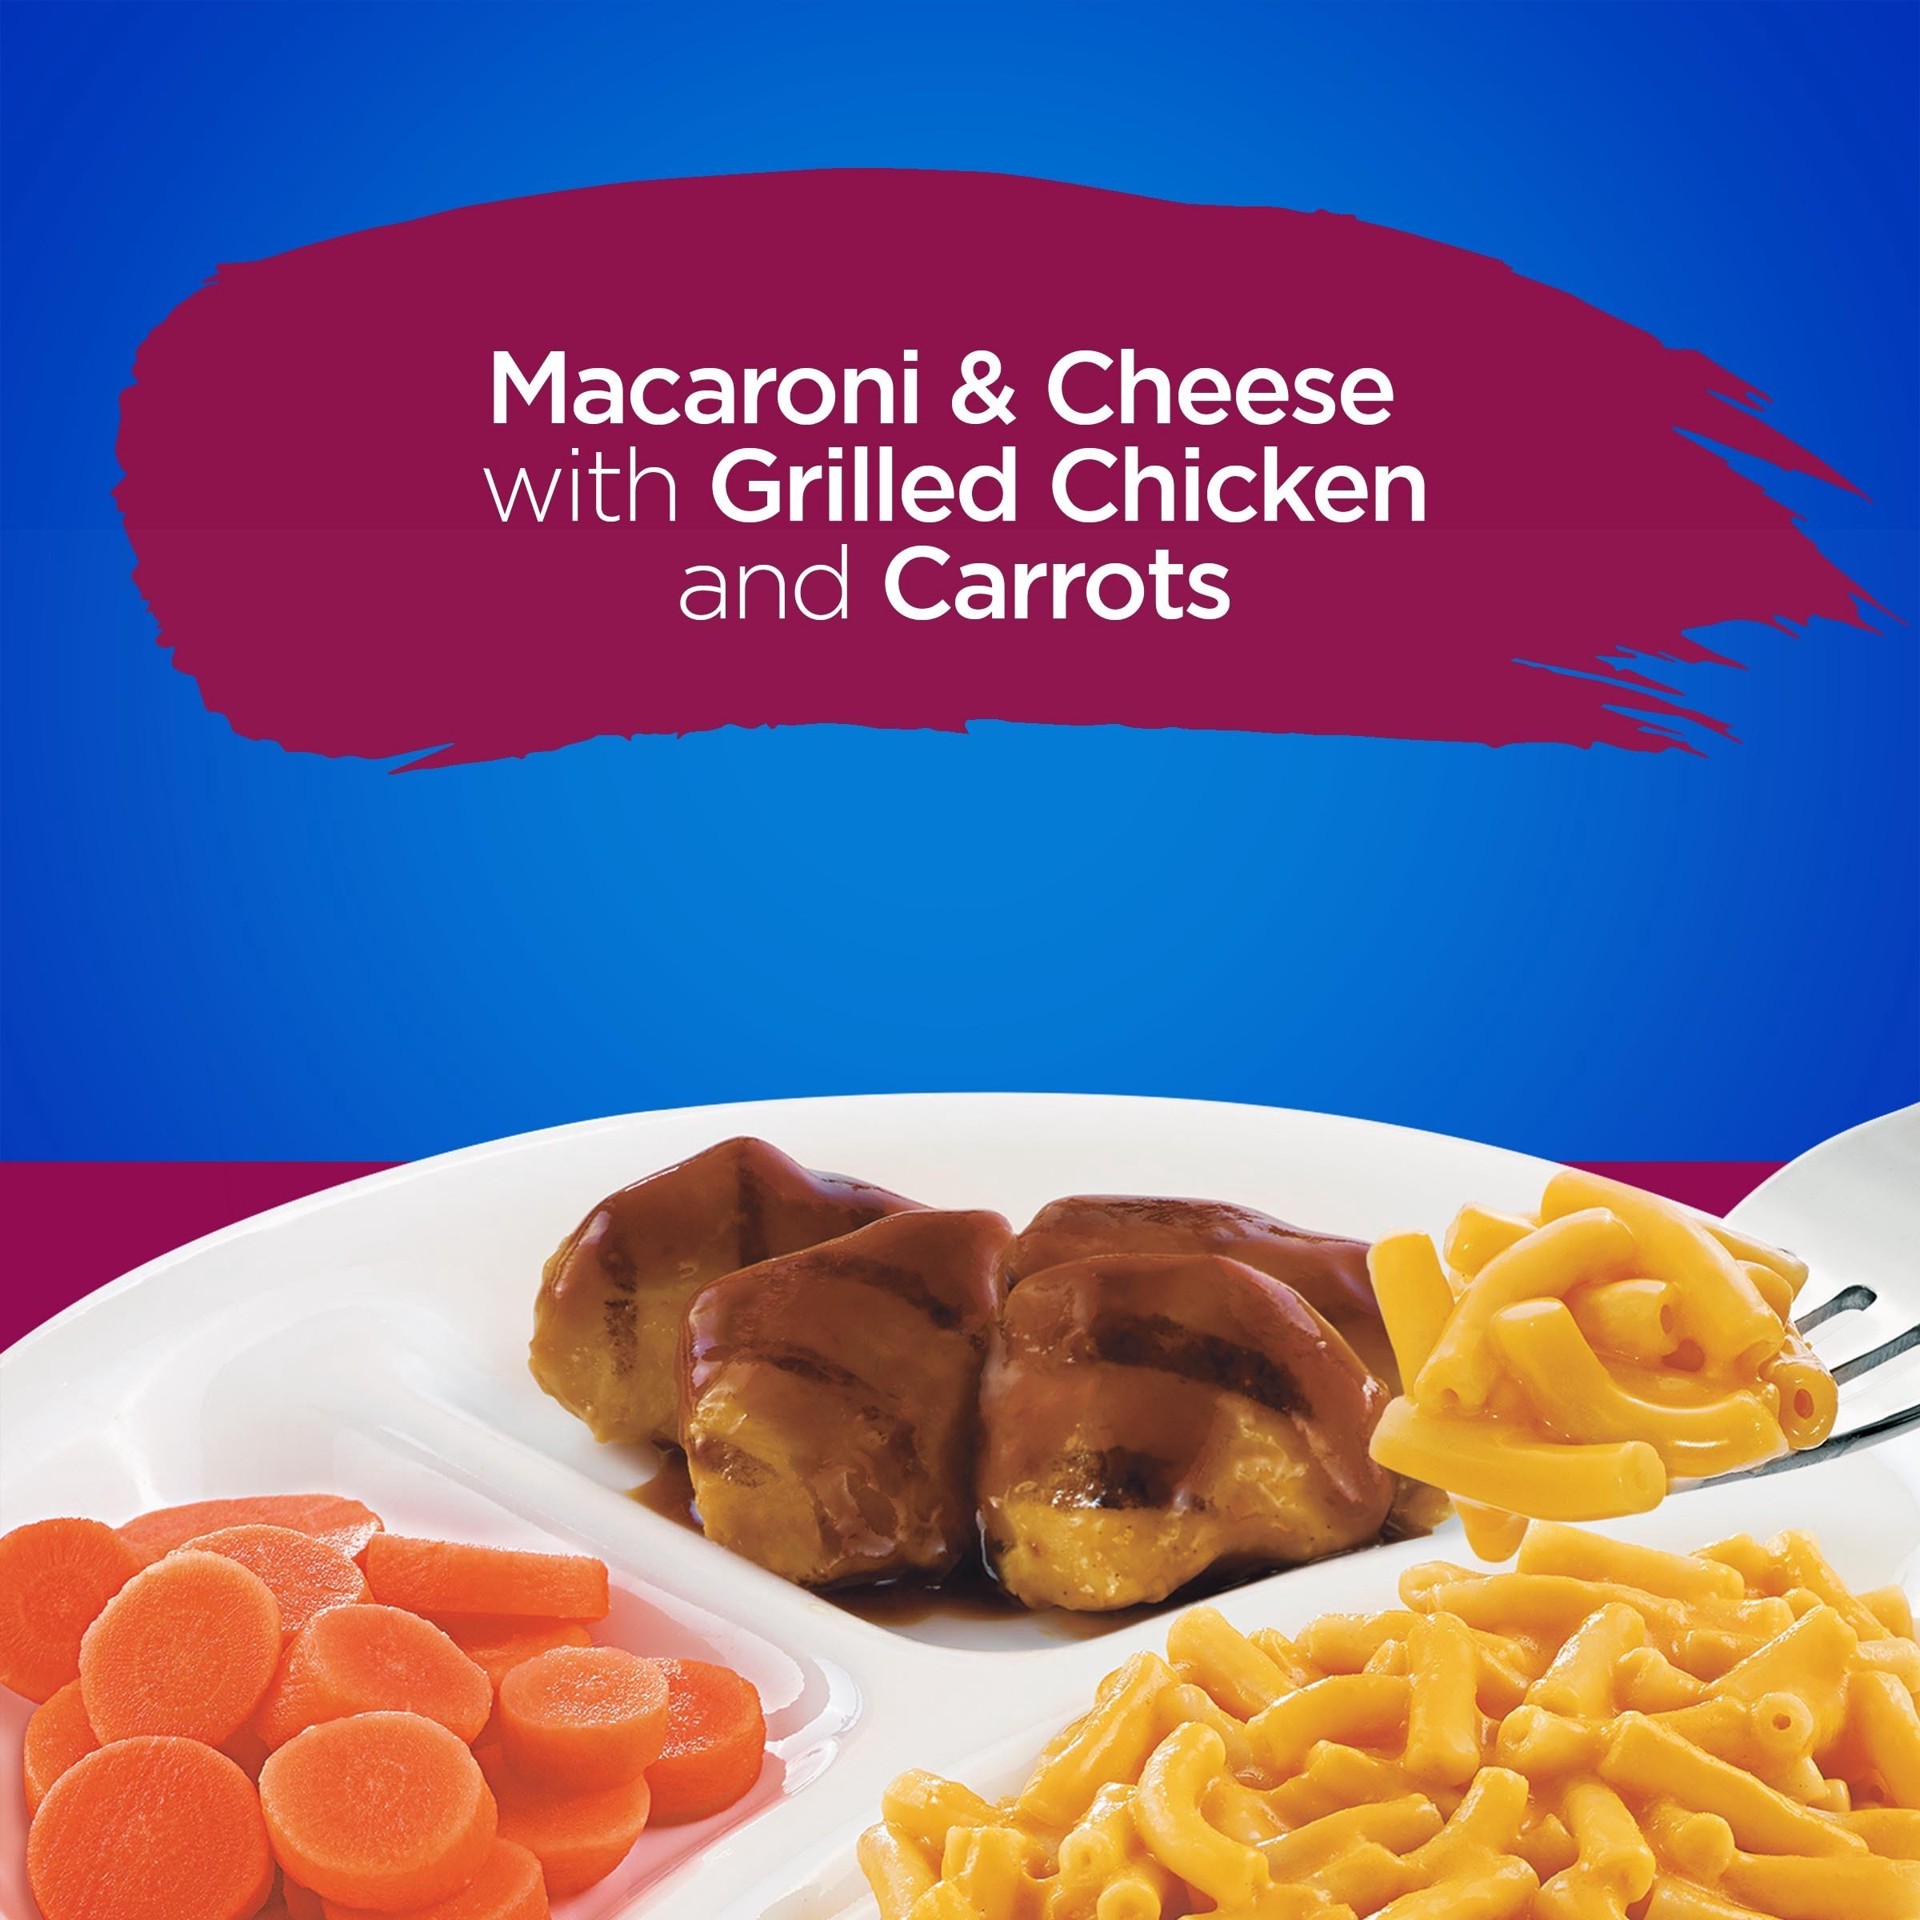 slide 10 of 10, Kraft Macaroni and Cheese Dinner with Grilled Chicken and Carrots 8.5 oz. Box, 8.5 oz